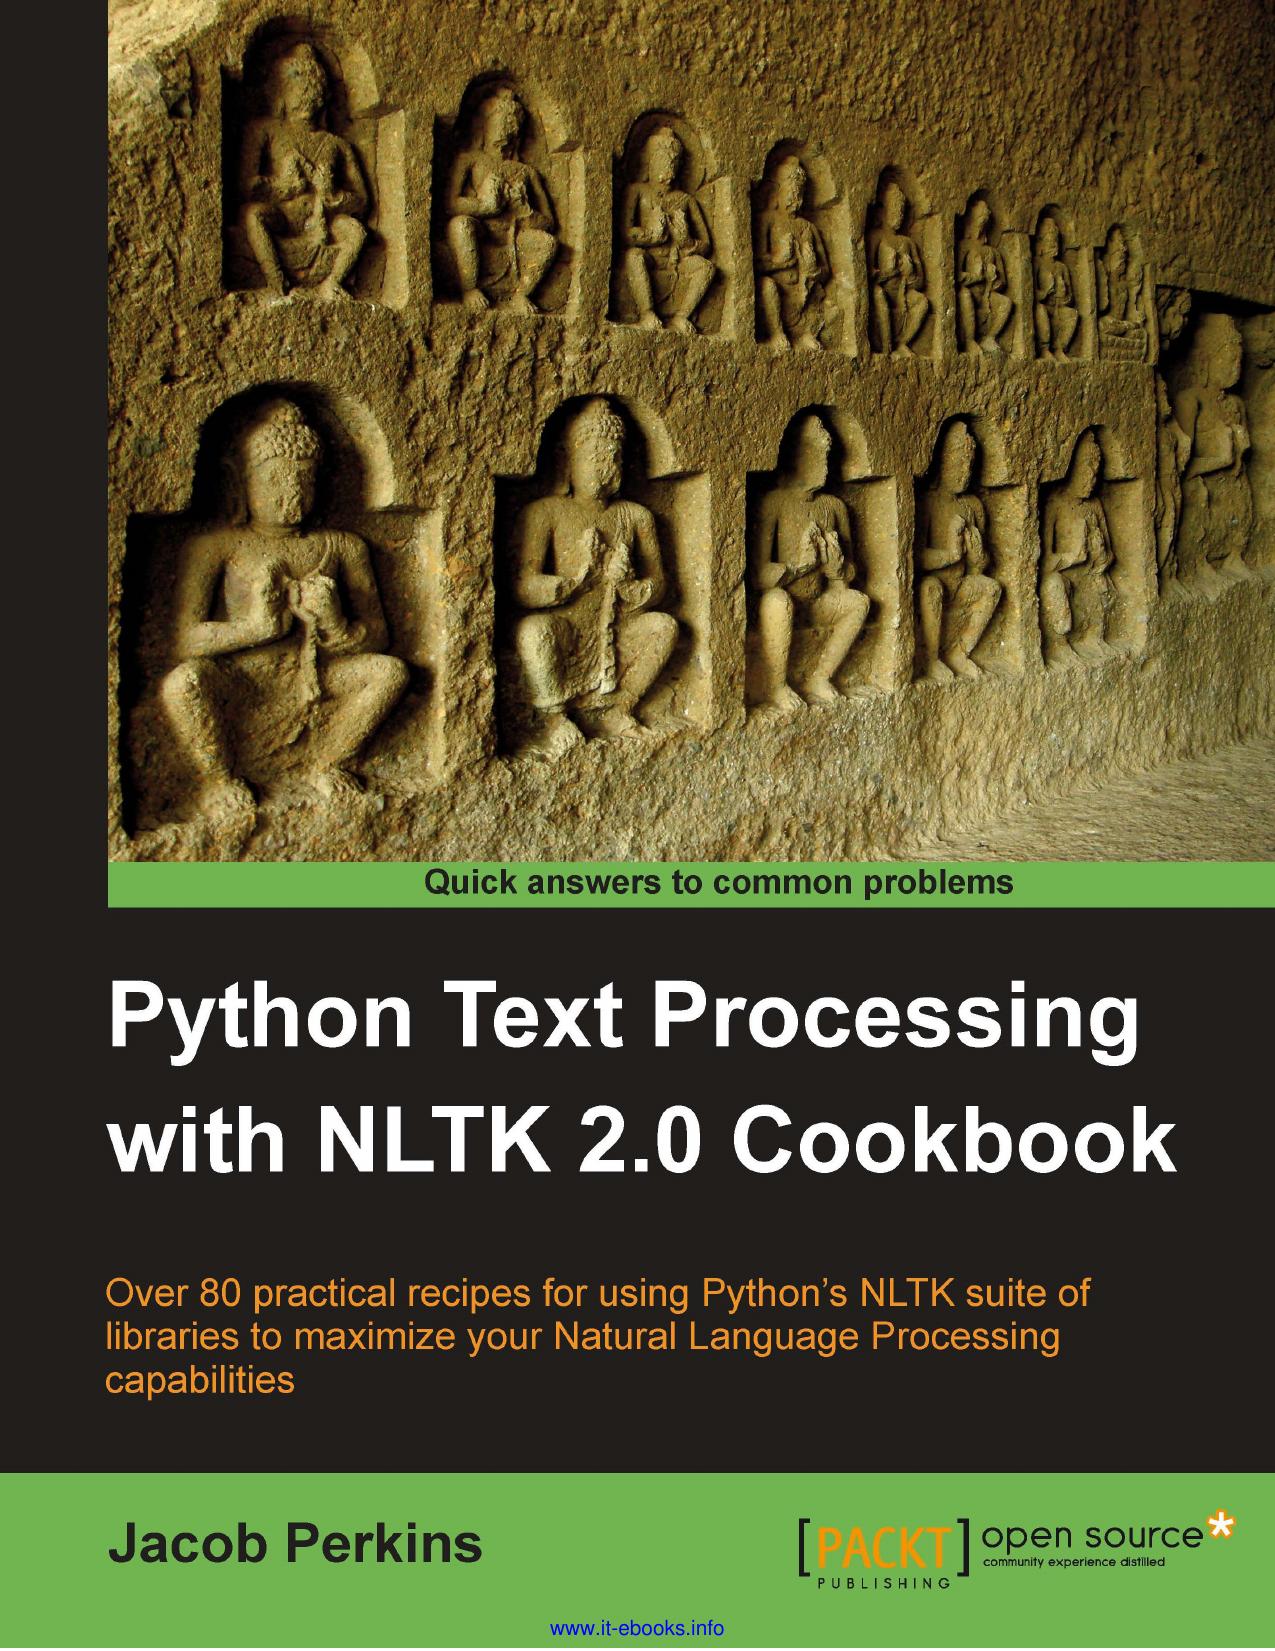 Python Text Processing with NLTK 2.0 Cookbook Use Pythons NLTK suite of libraries to maximize your Natural Language Processing capabilities